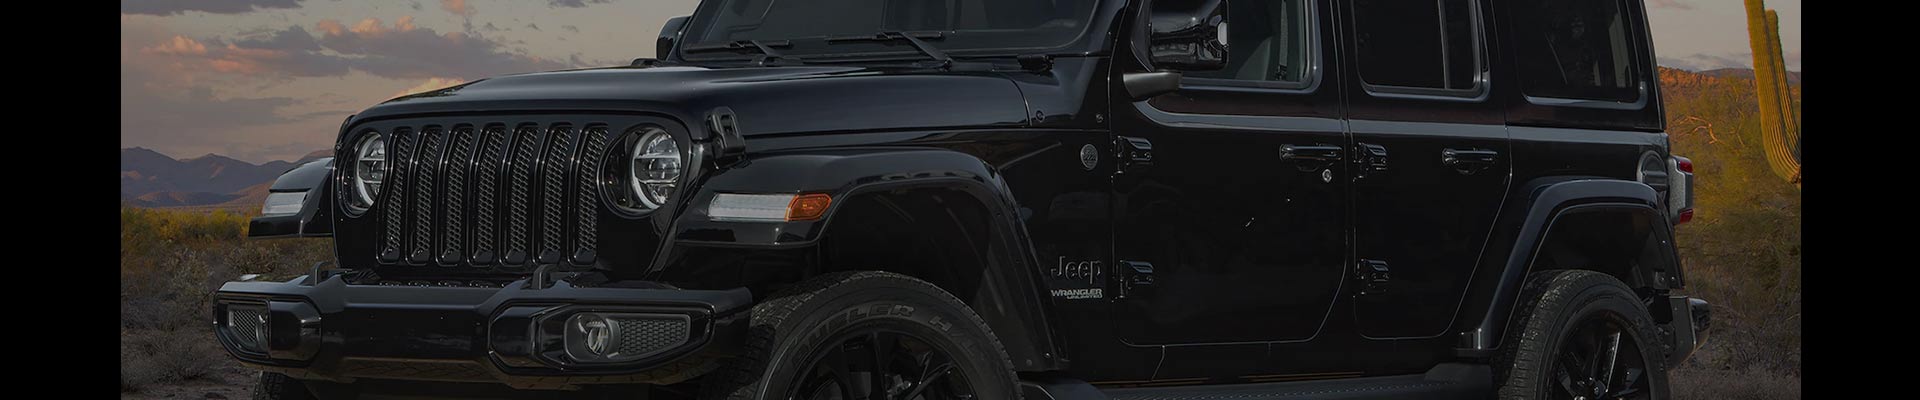 Shop Replacement and OEM 1995 Jeep Wrangler Parts with Discounted Price on the Net